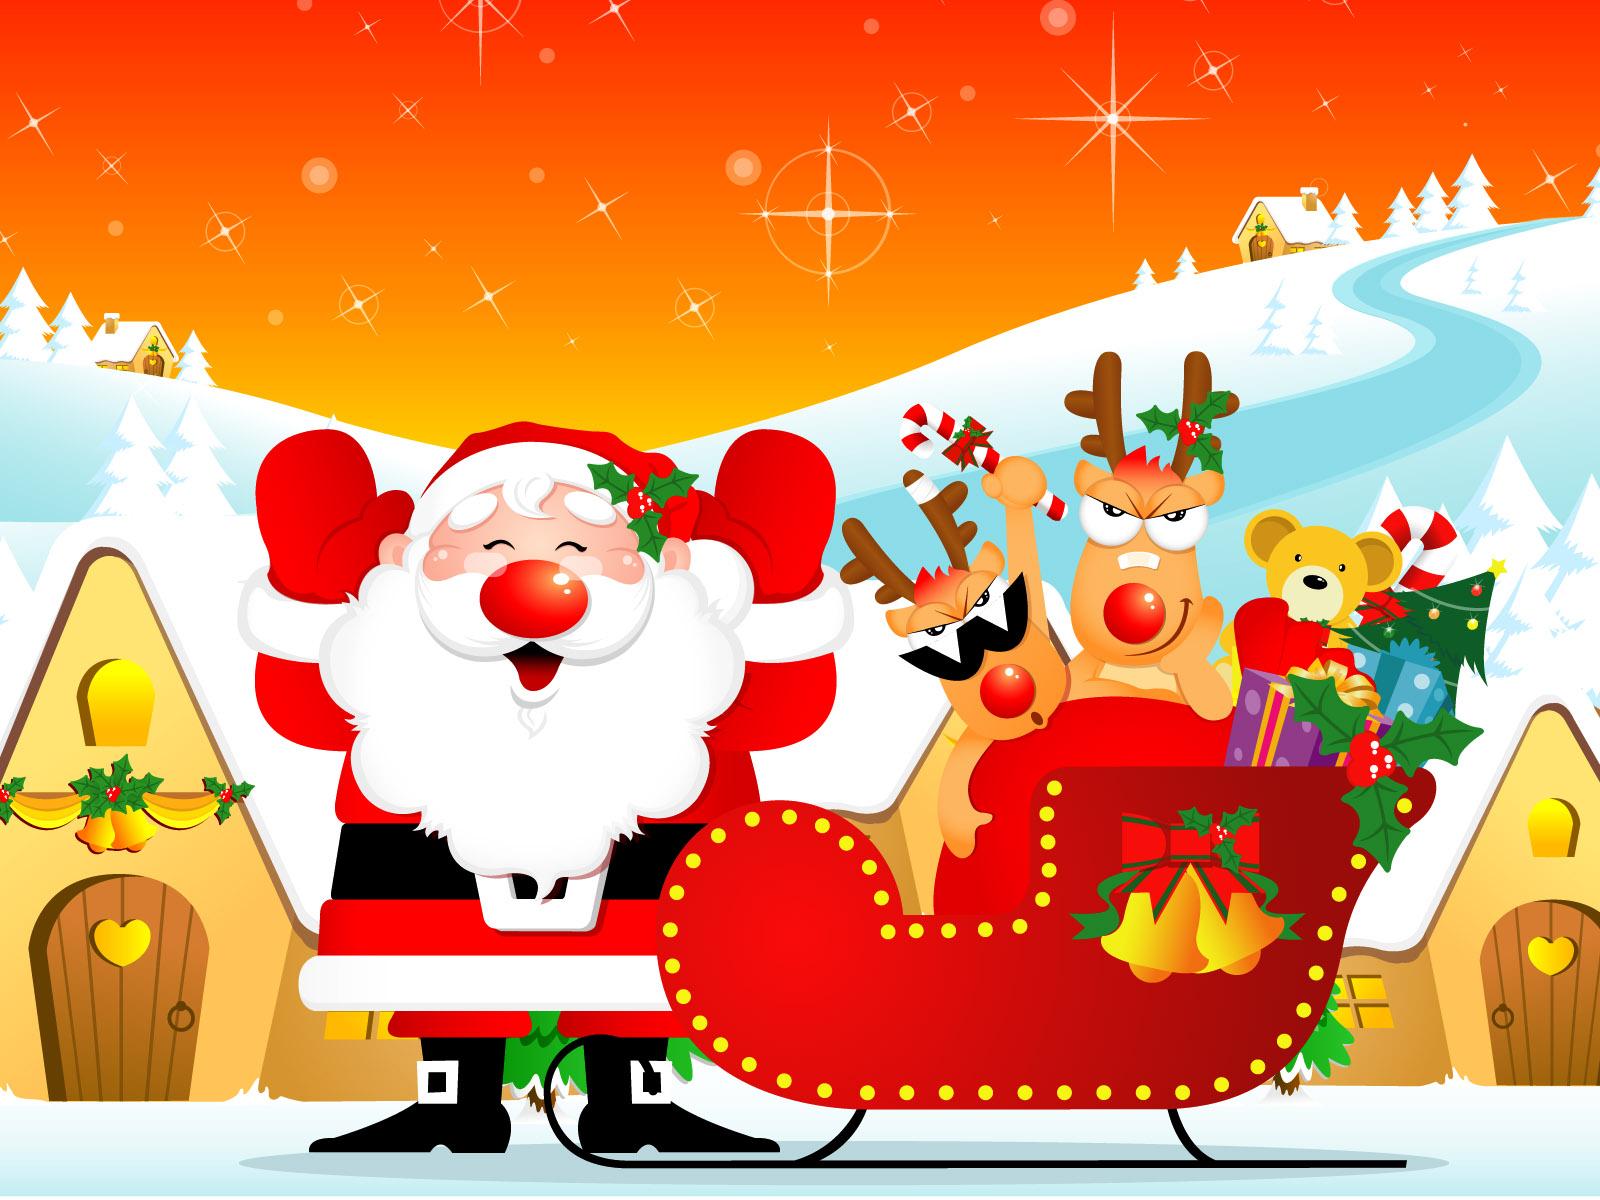 Funny Santa Claus and Reindeers widescreen wallpaper. Wide